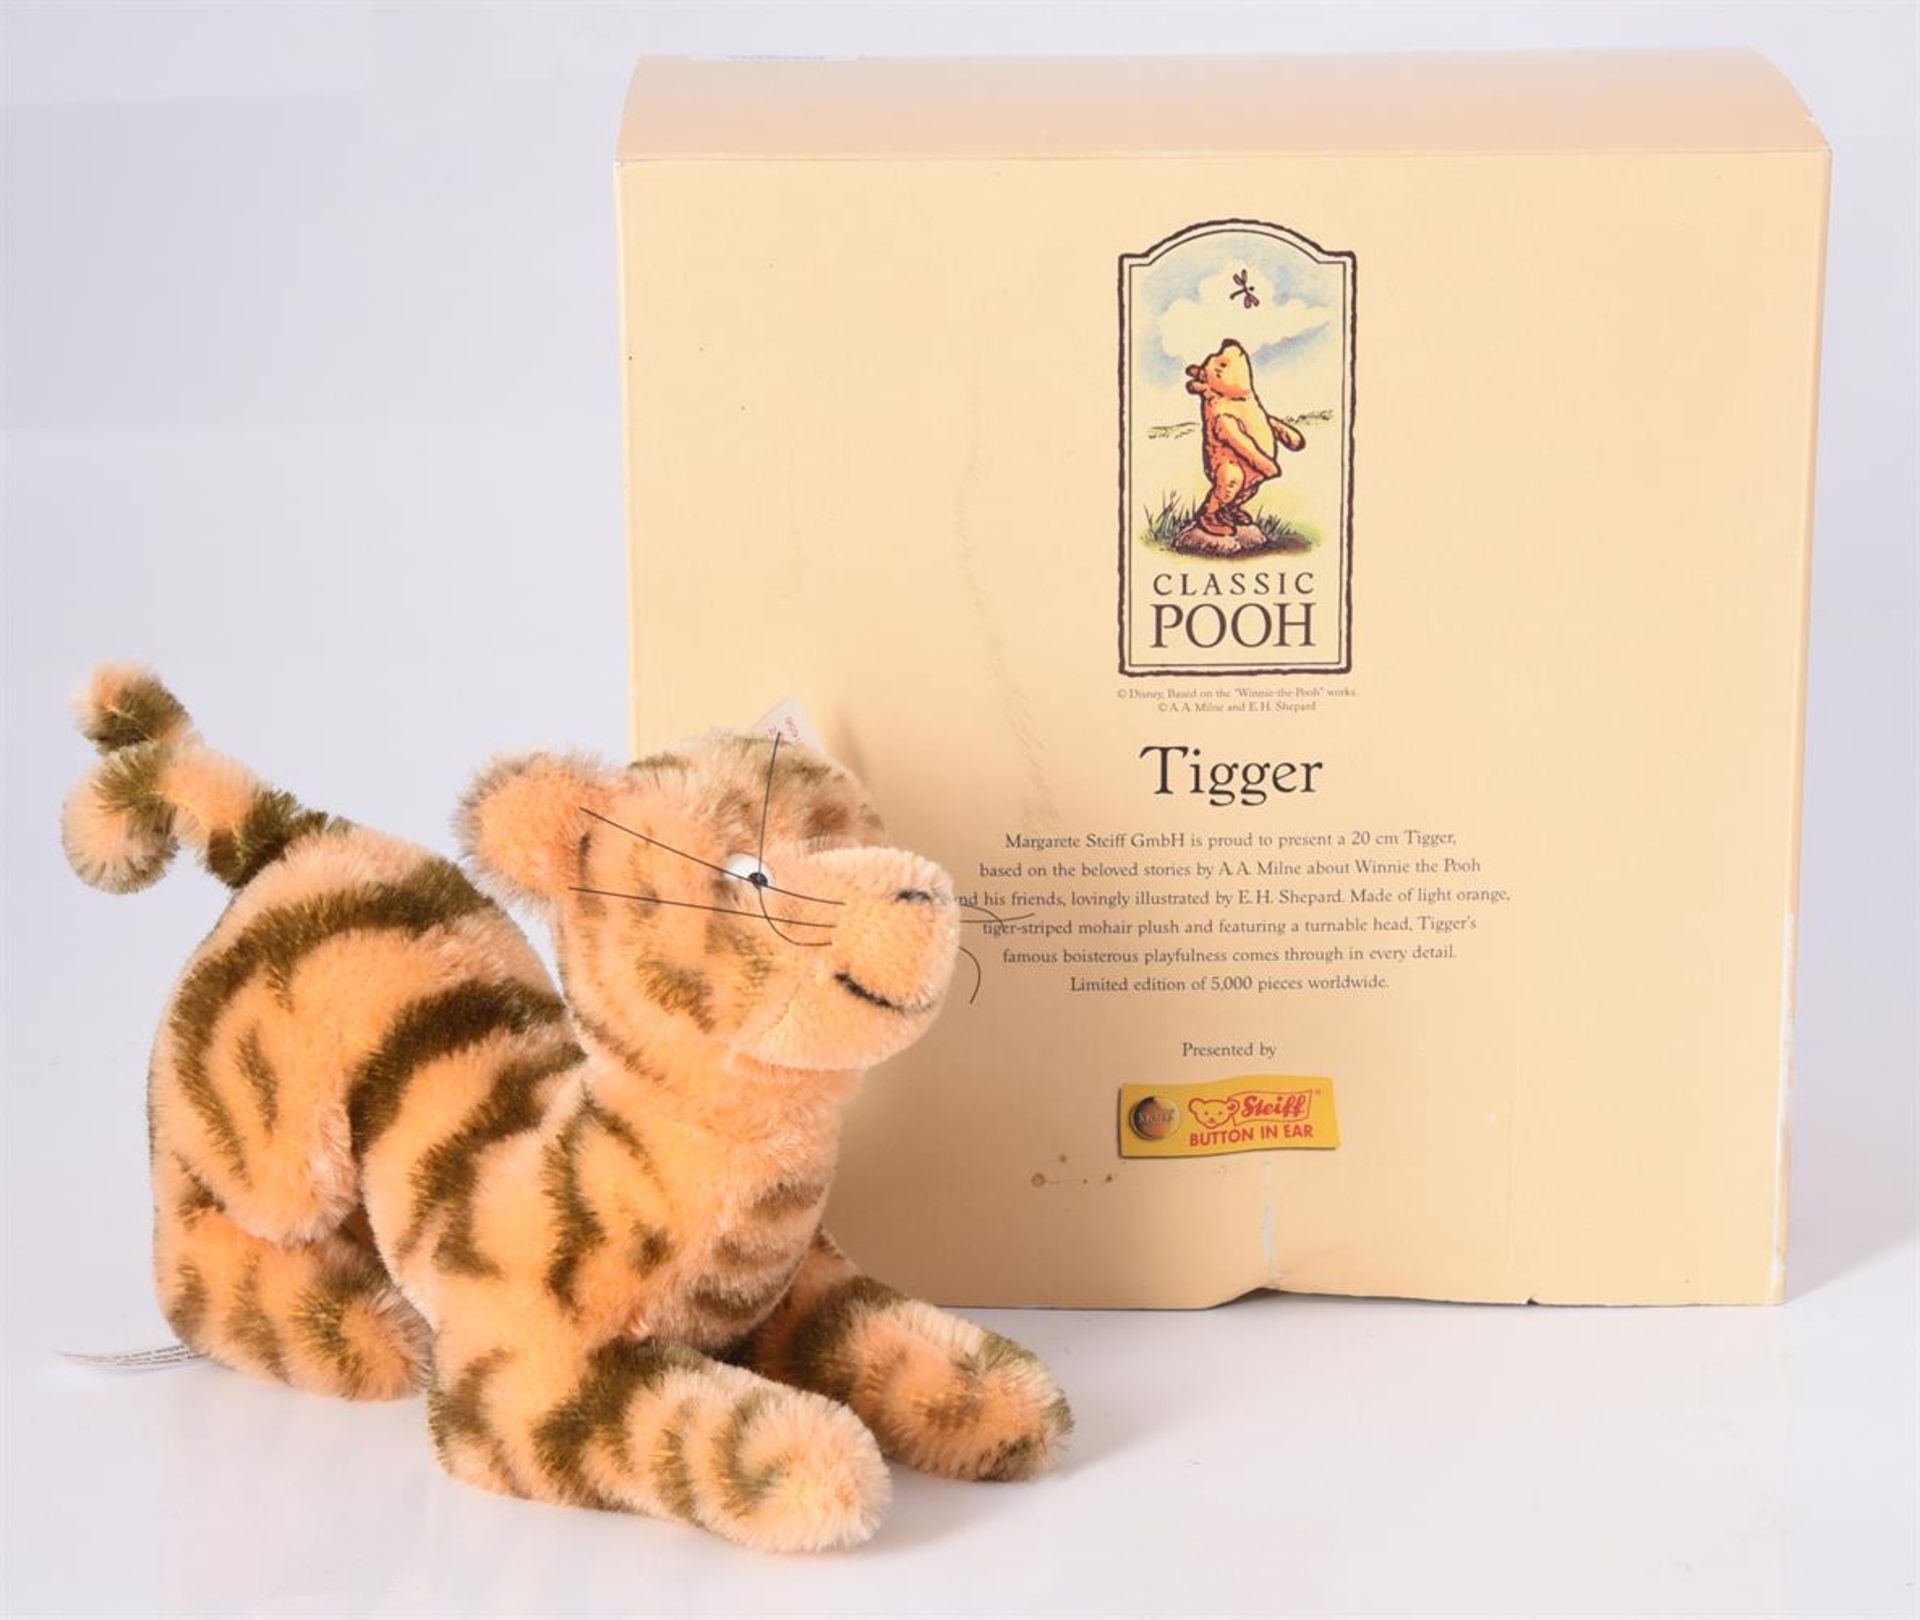 STEIFF, TIGGER, 04798, CLASSIC POOH COLLECTION, CIRCA 2000 - Image 3 of 3